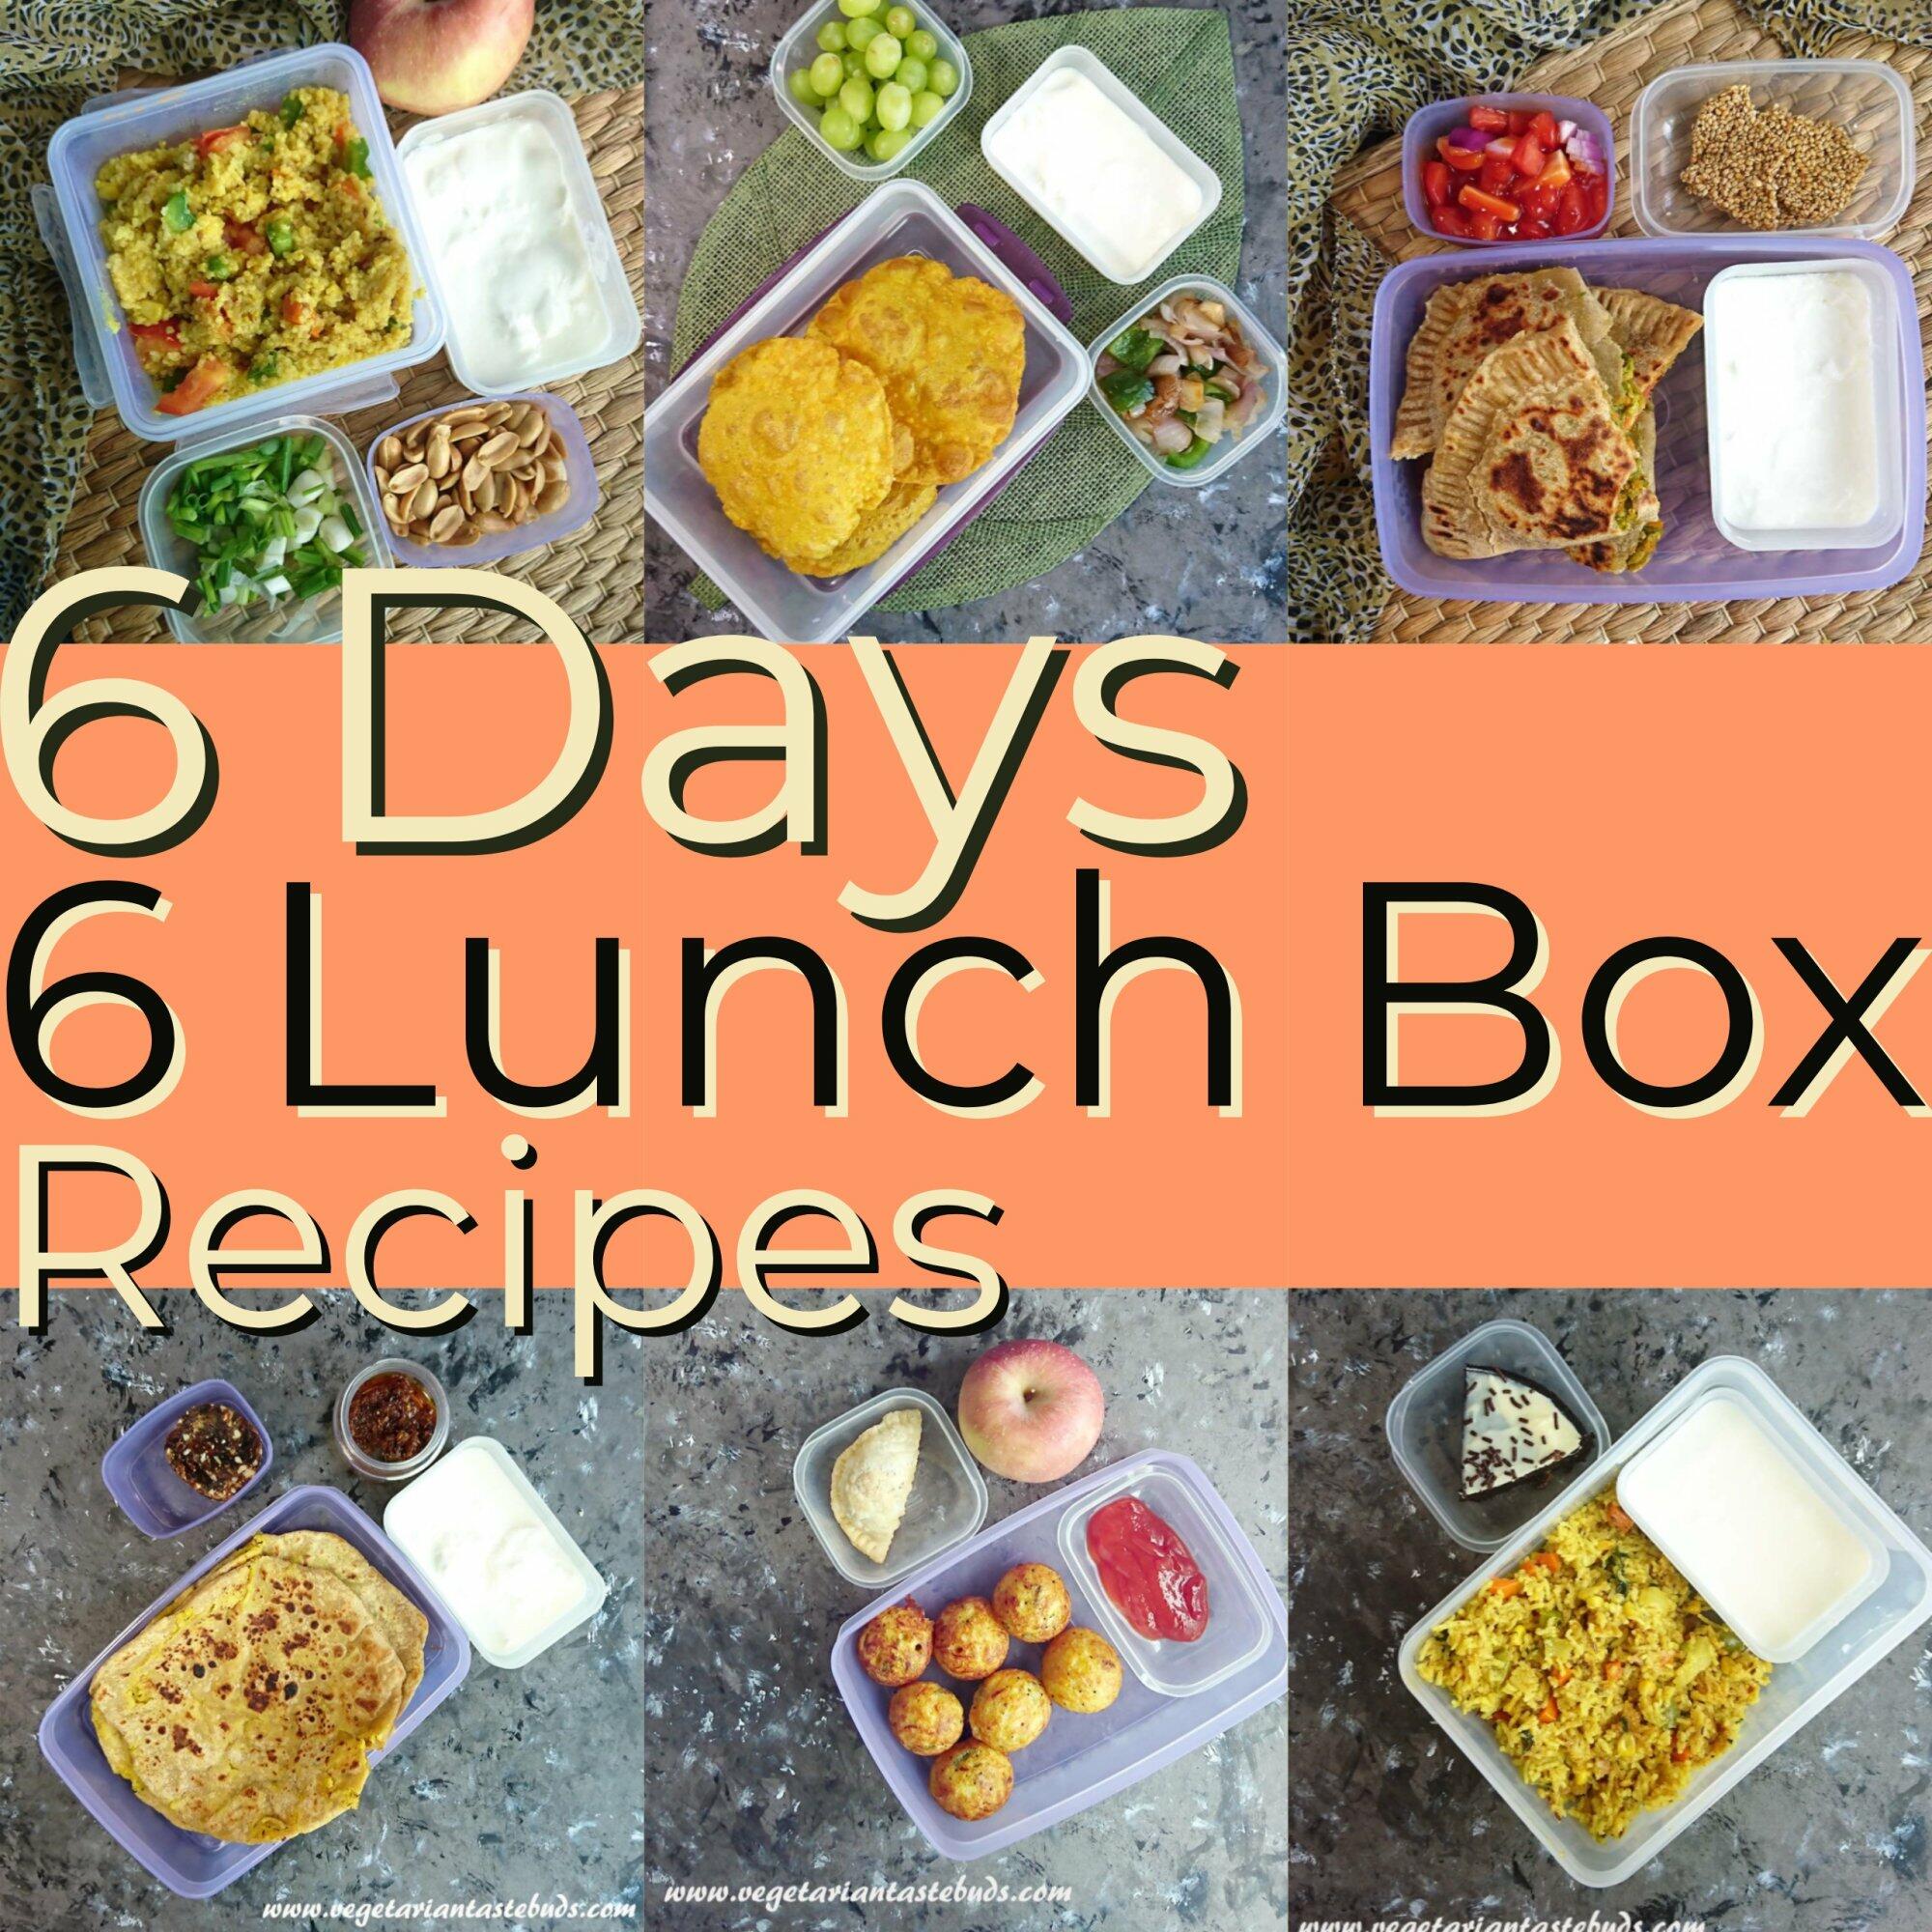 Lunch Box Recipes Menu 6 Days 6 Lunch Box Recipes Easy To Make 